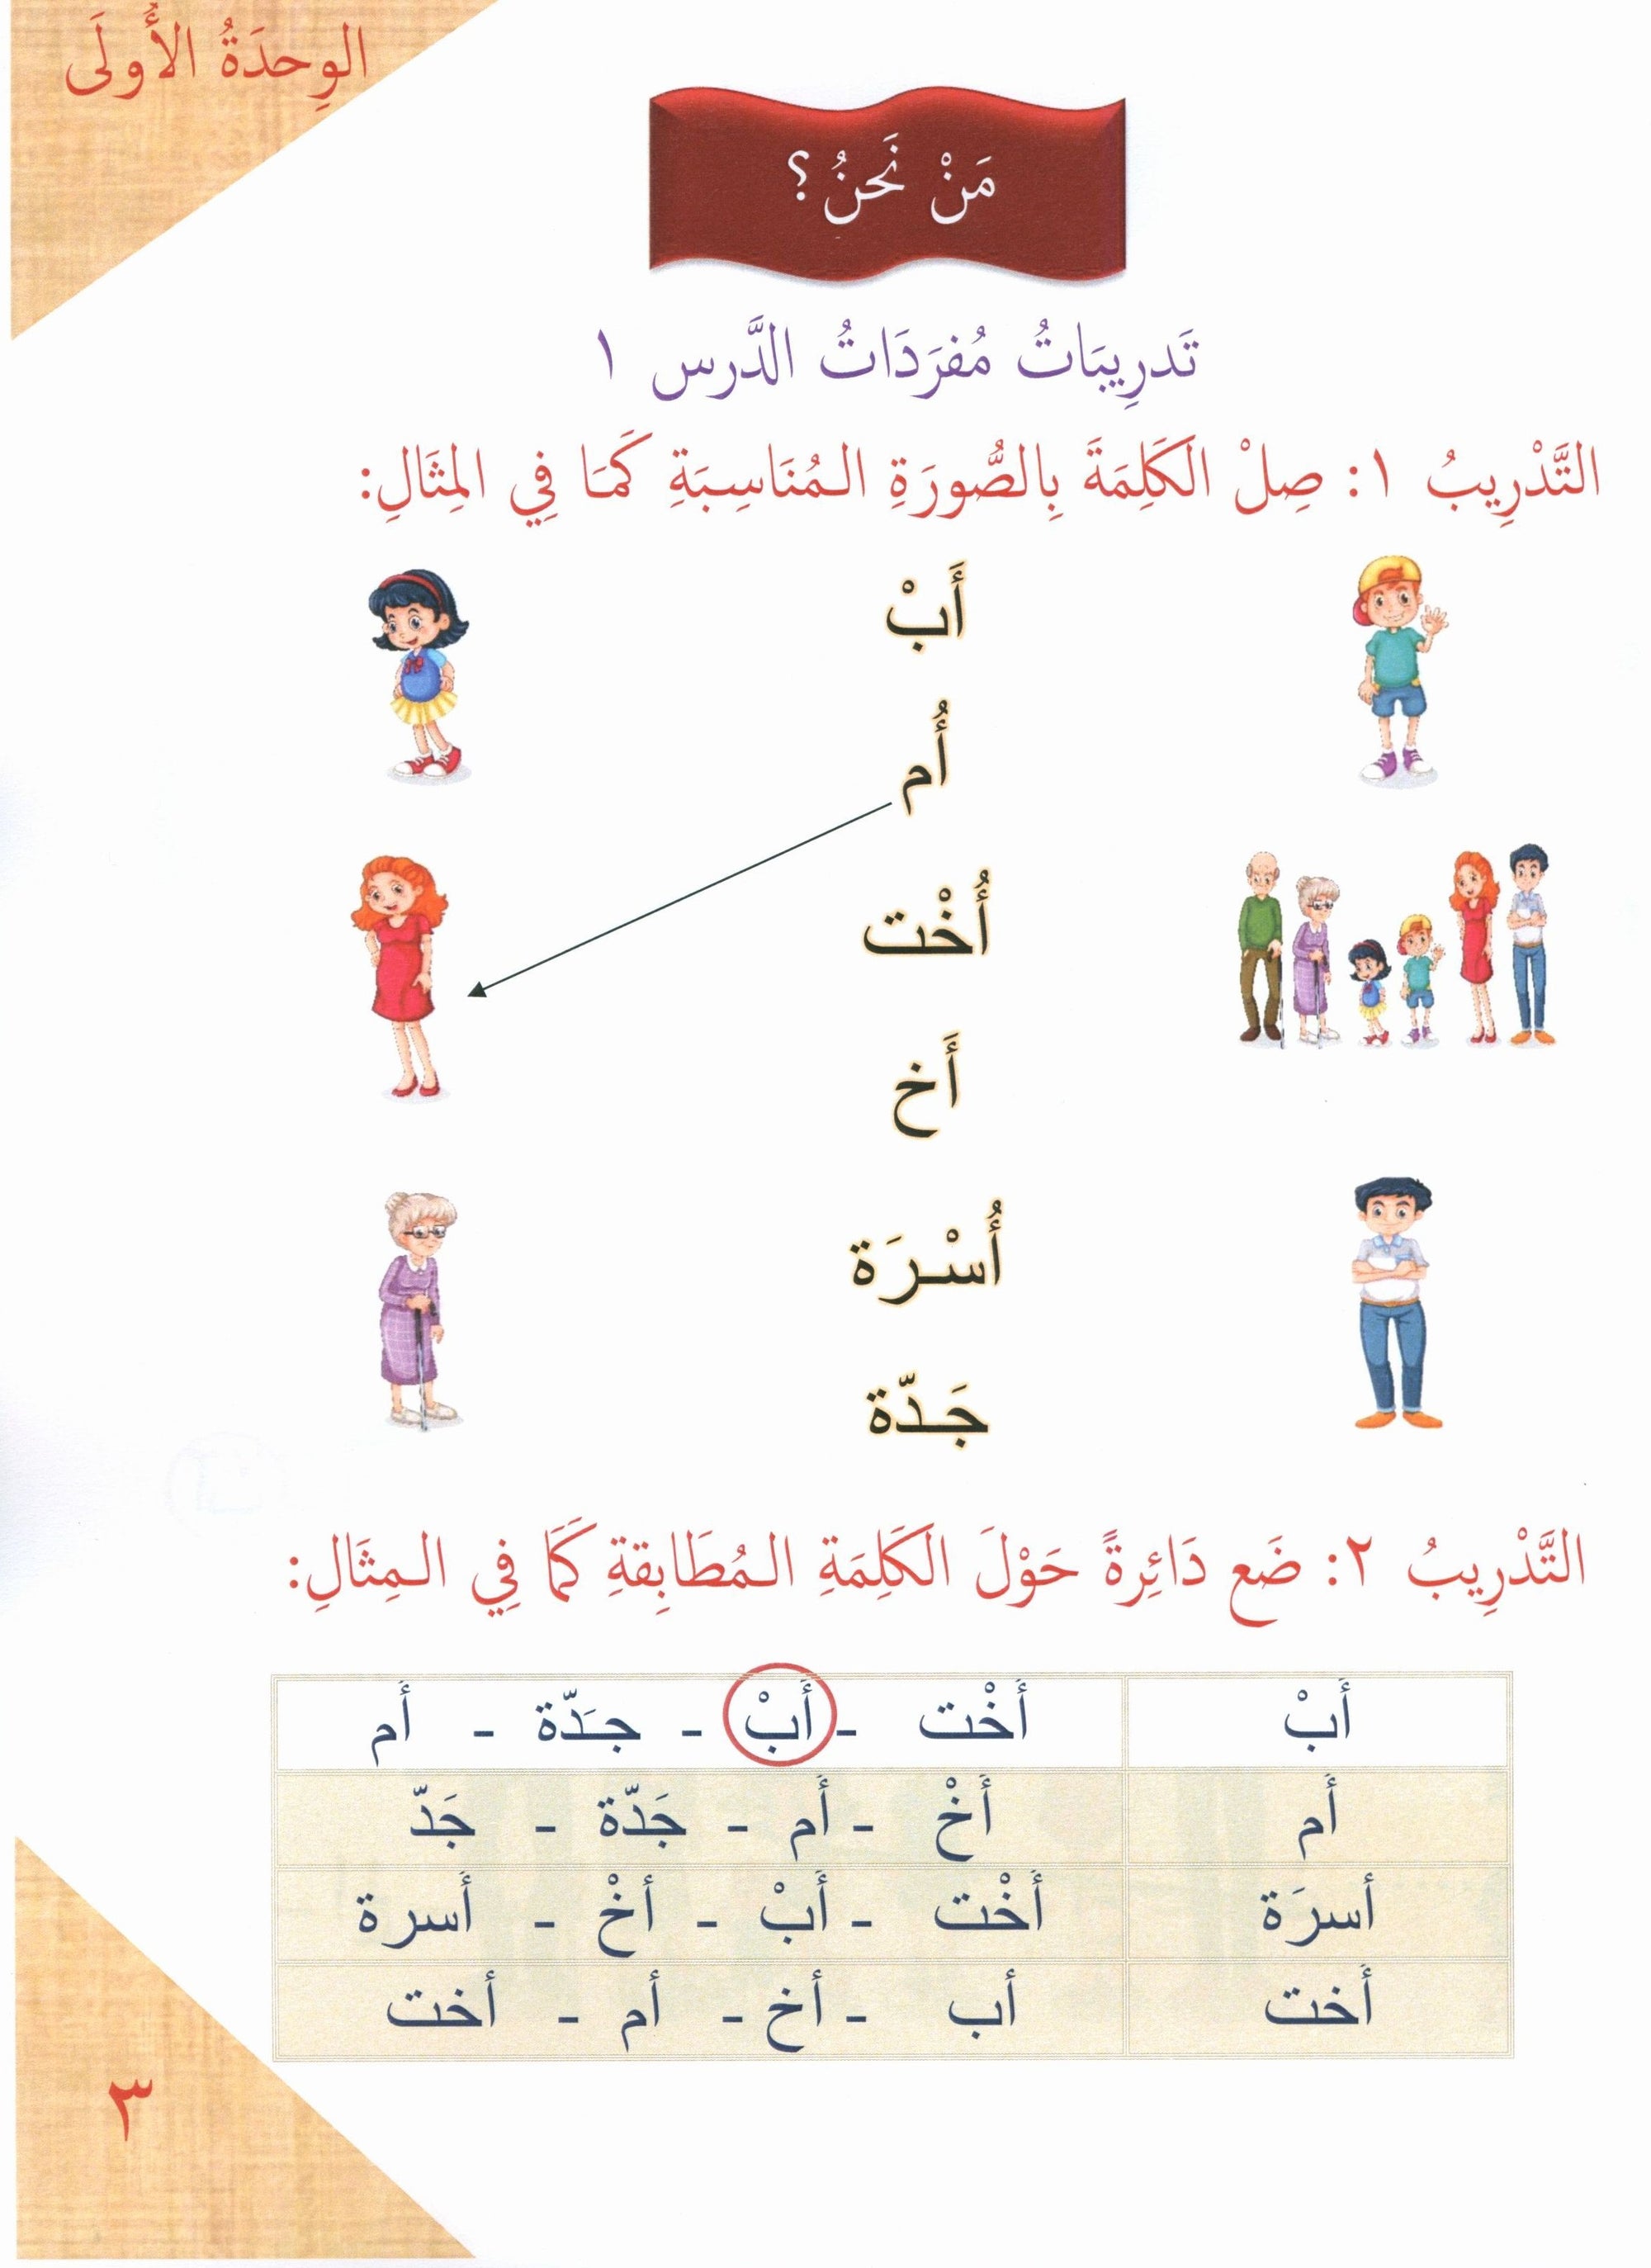 Our Language Is Our Pride Reading Level 1 لغتنا فخرنا